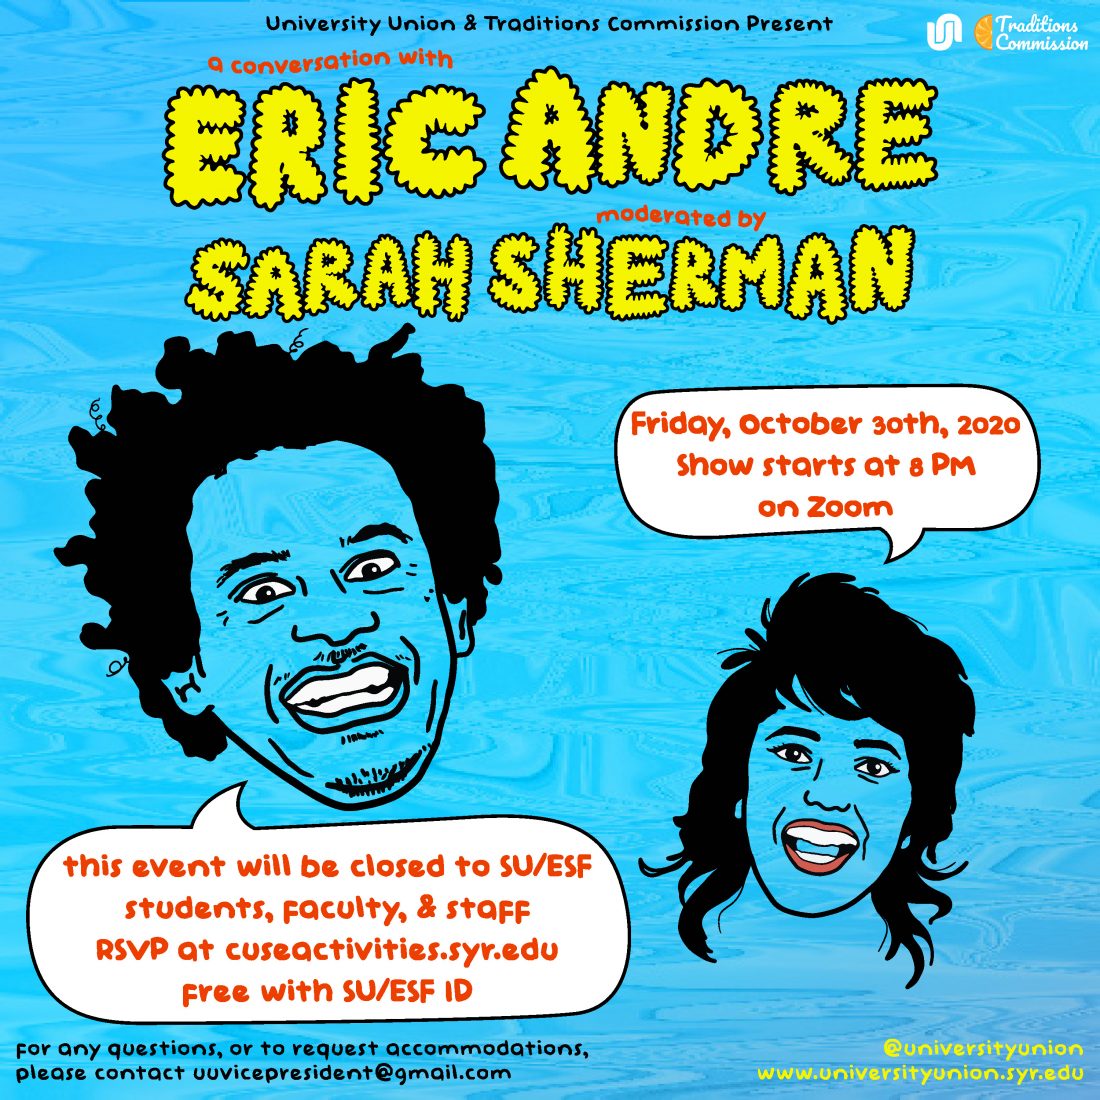 A bright blue background with yellow cloud writing promotes the event with Eric Andre. A drawing of Eric Andre and Sarah Sherman are featured.